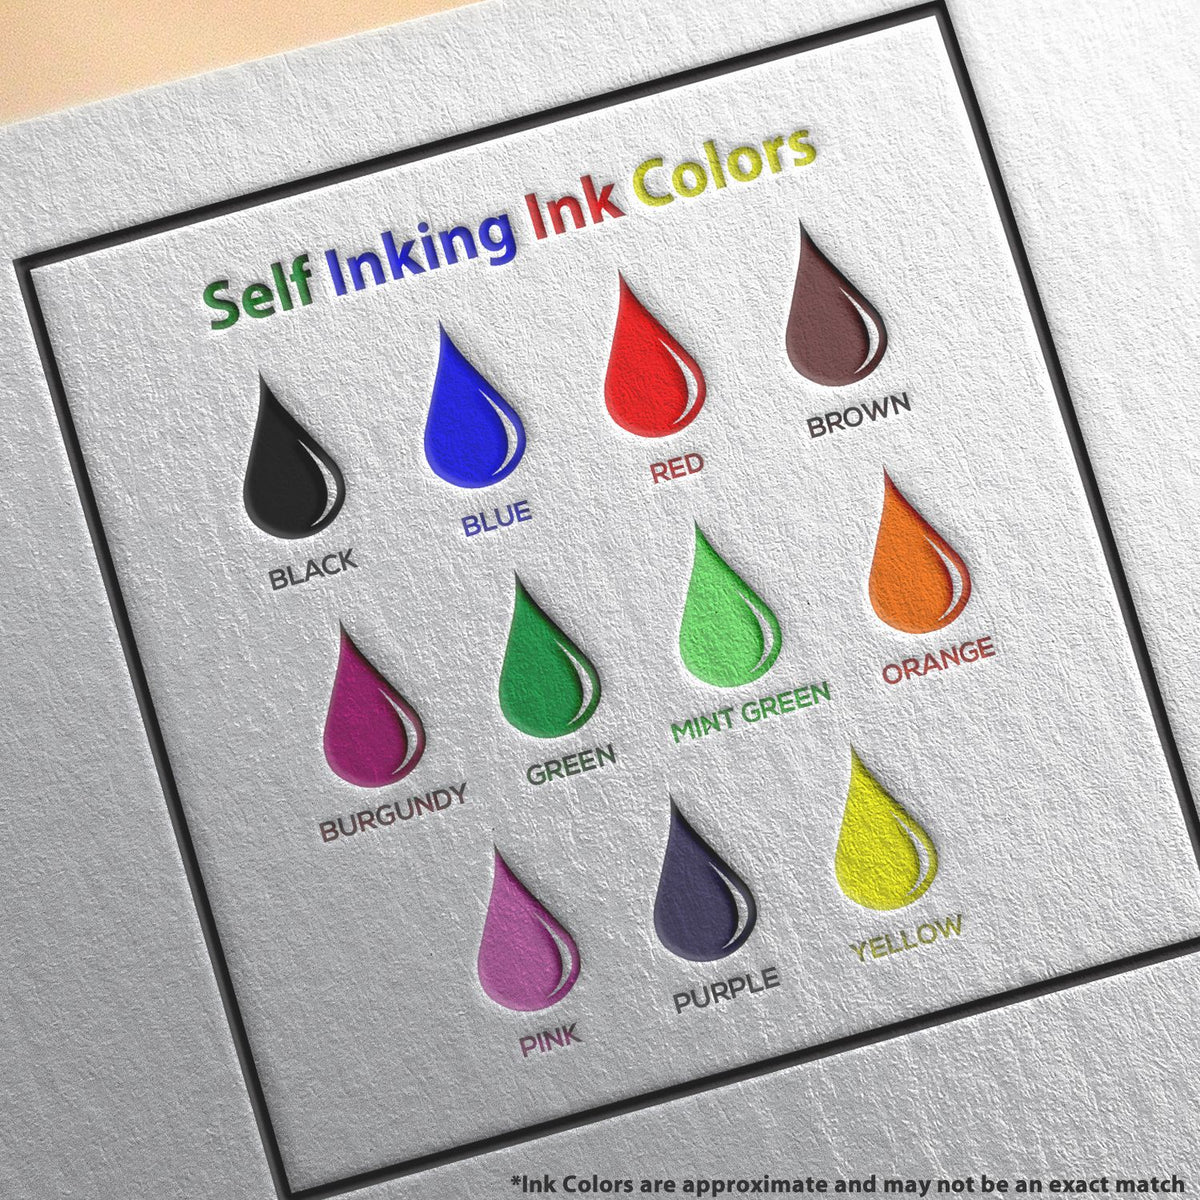 A picture showing the different ink colors or hues available for the Self-Inking Minnesota Landscape Architect Stamp product.